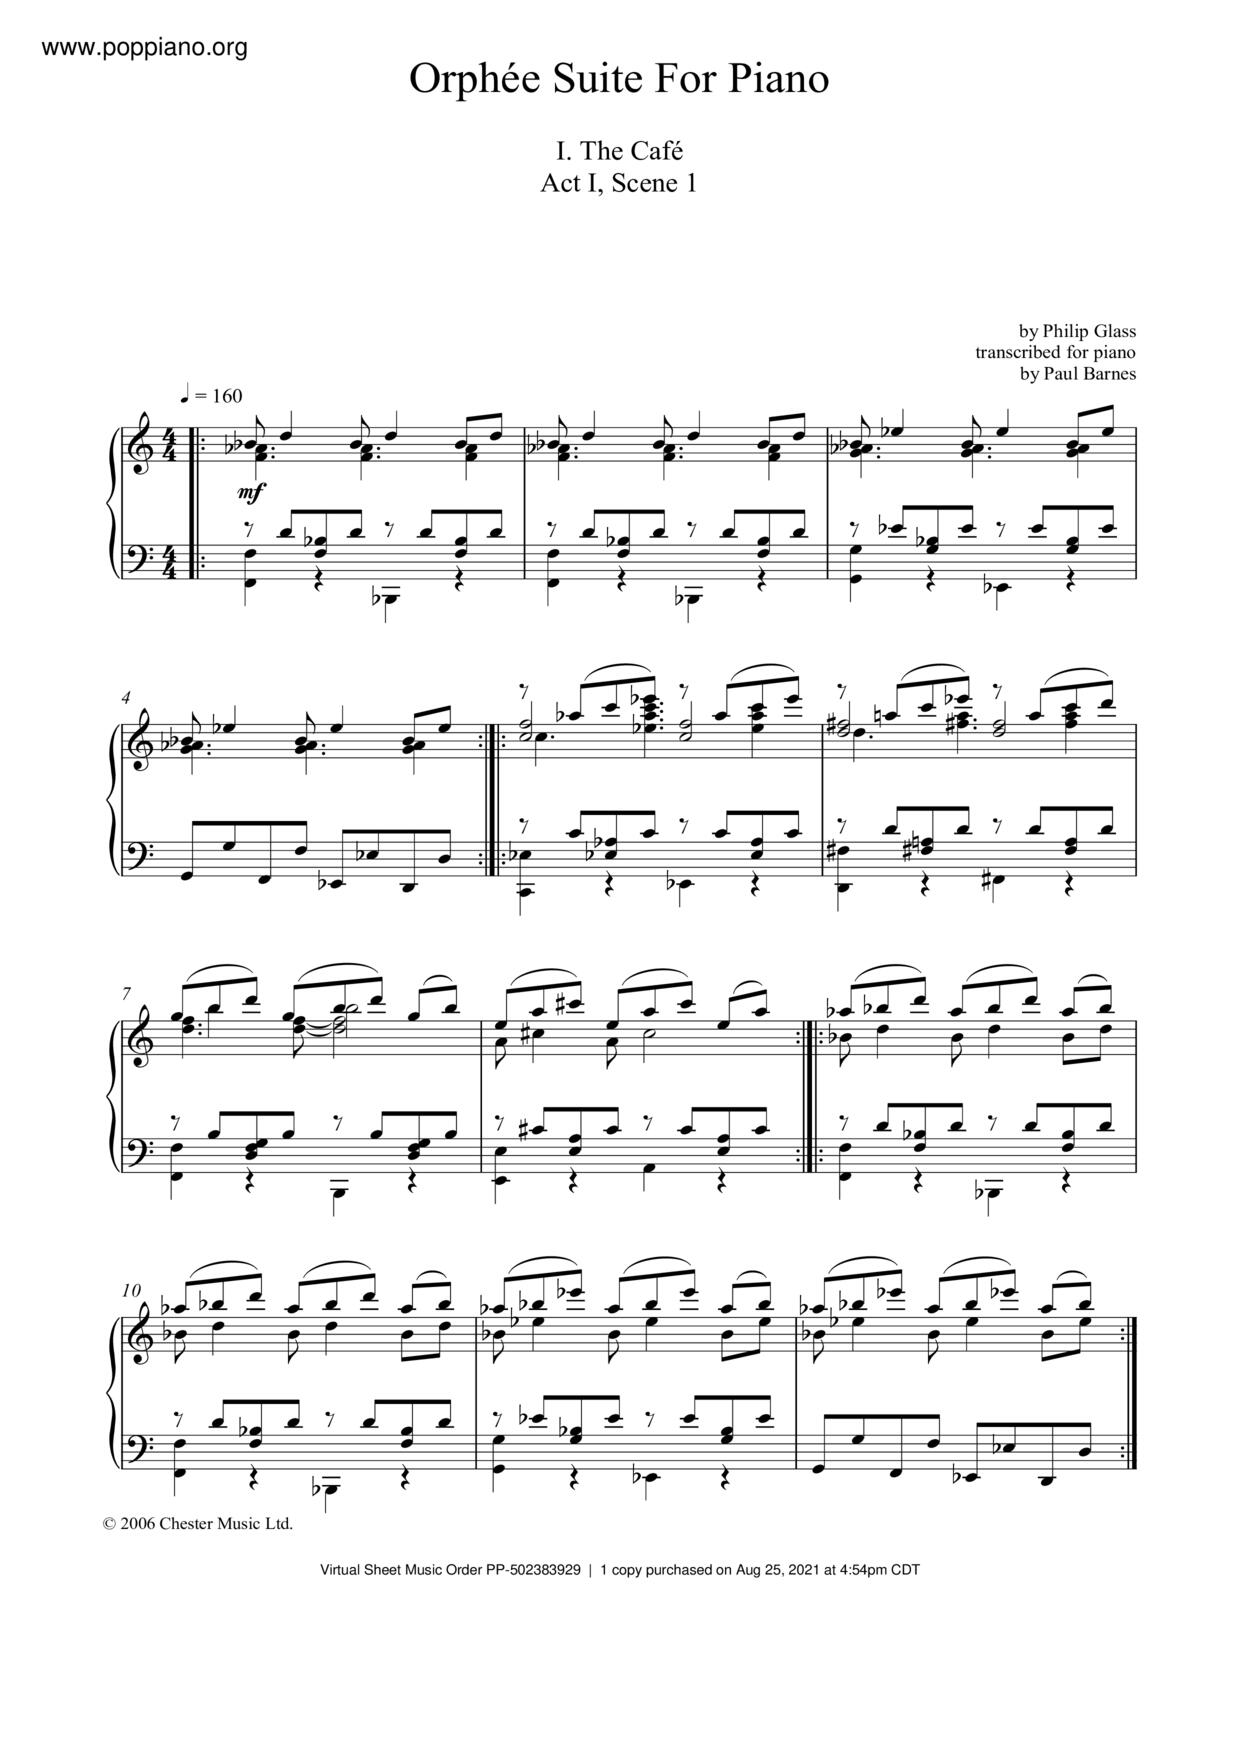 Orphee Suite For Piano, I. The Cafe, Act I, Scene 1琴譜